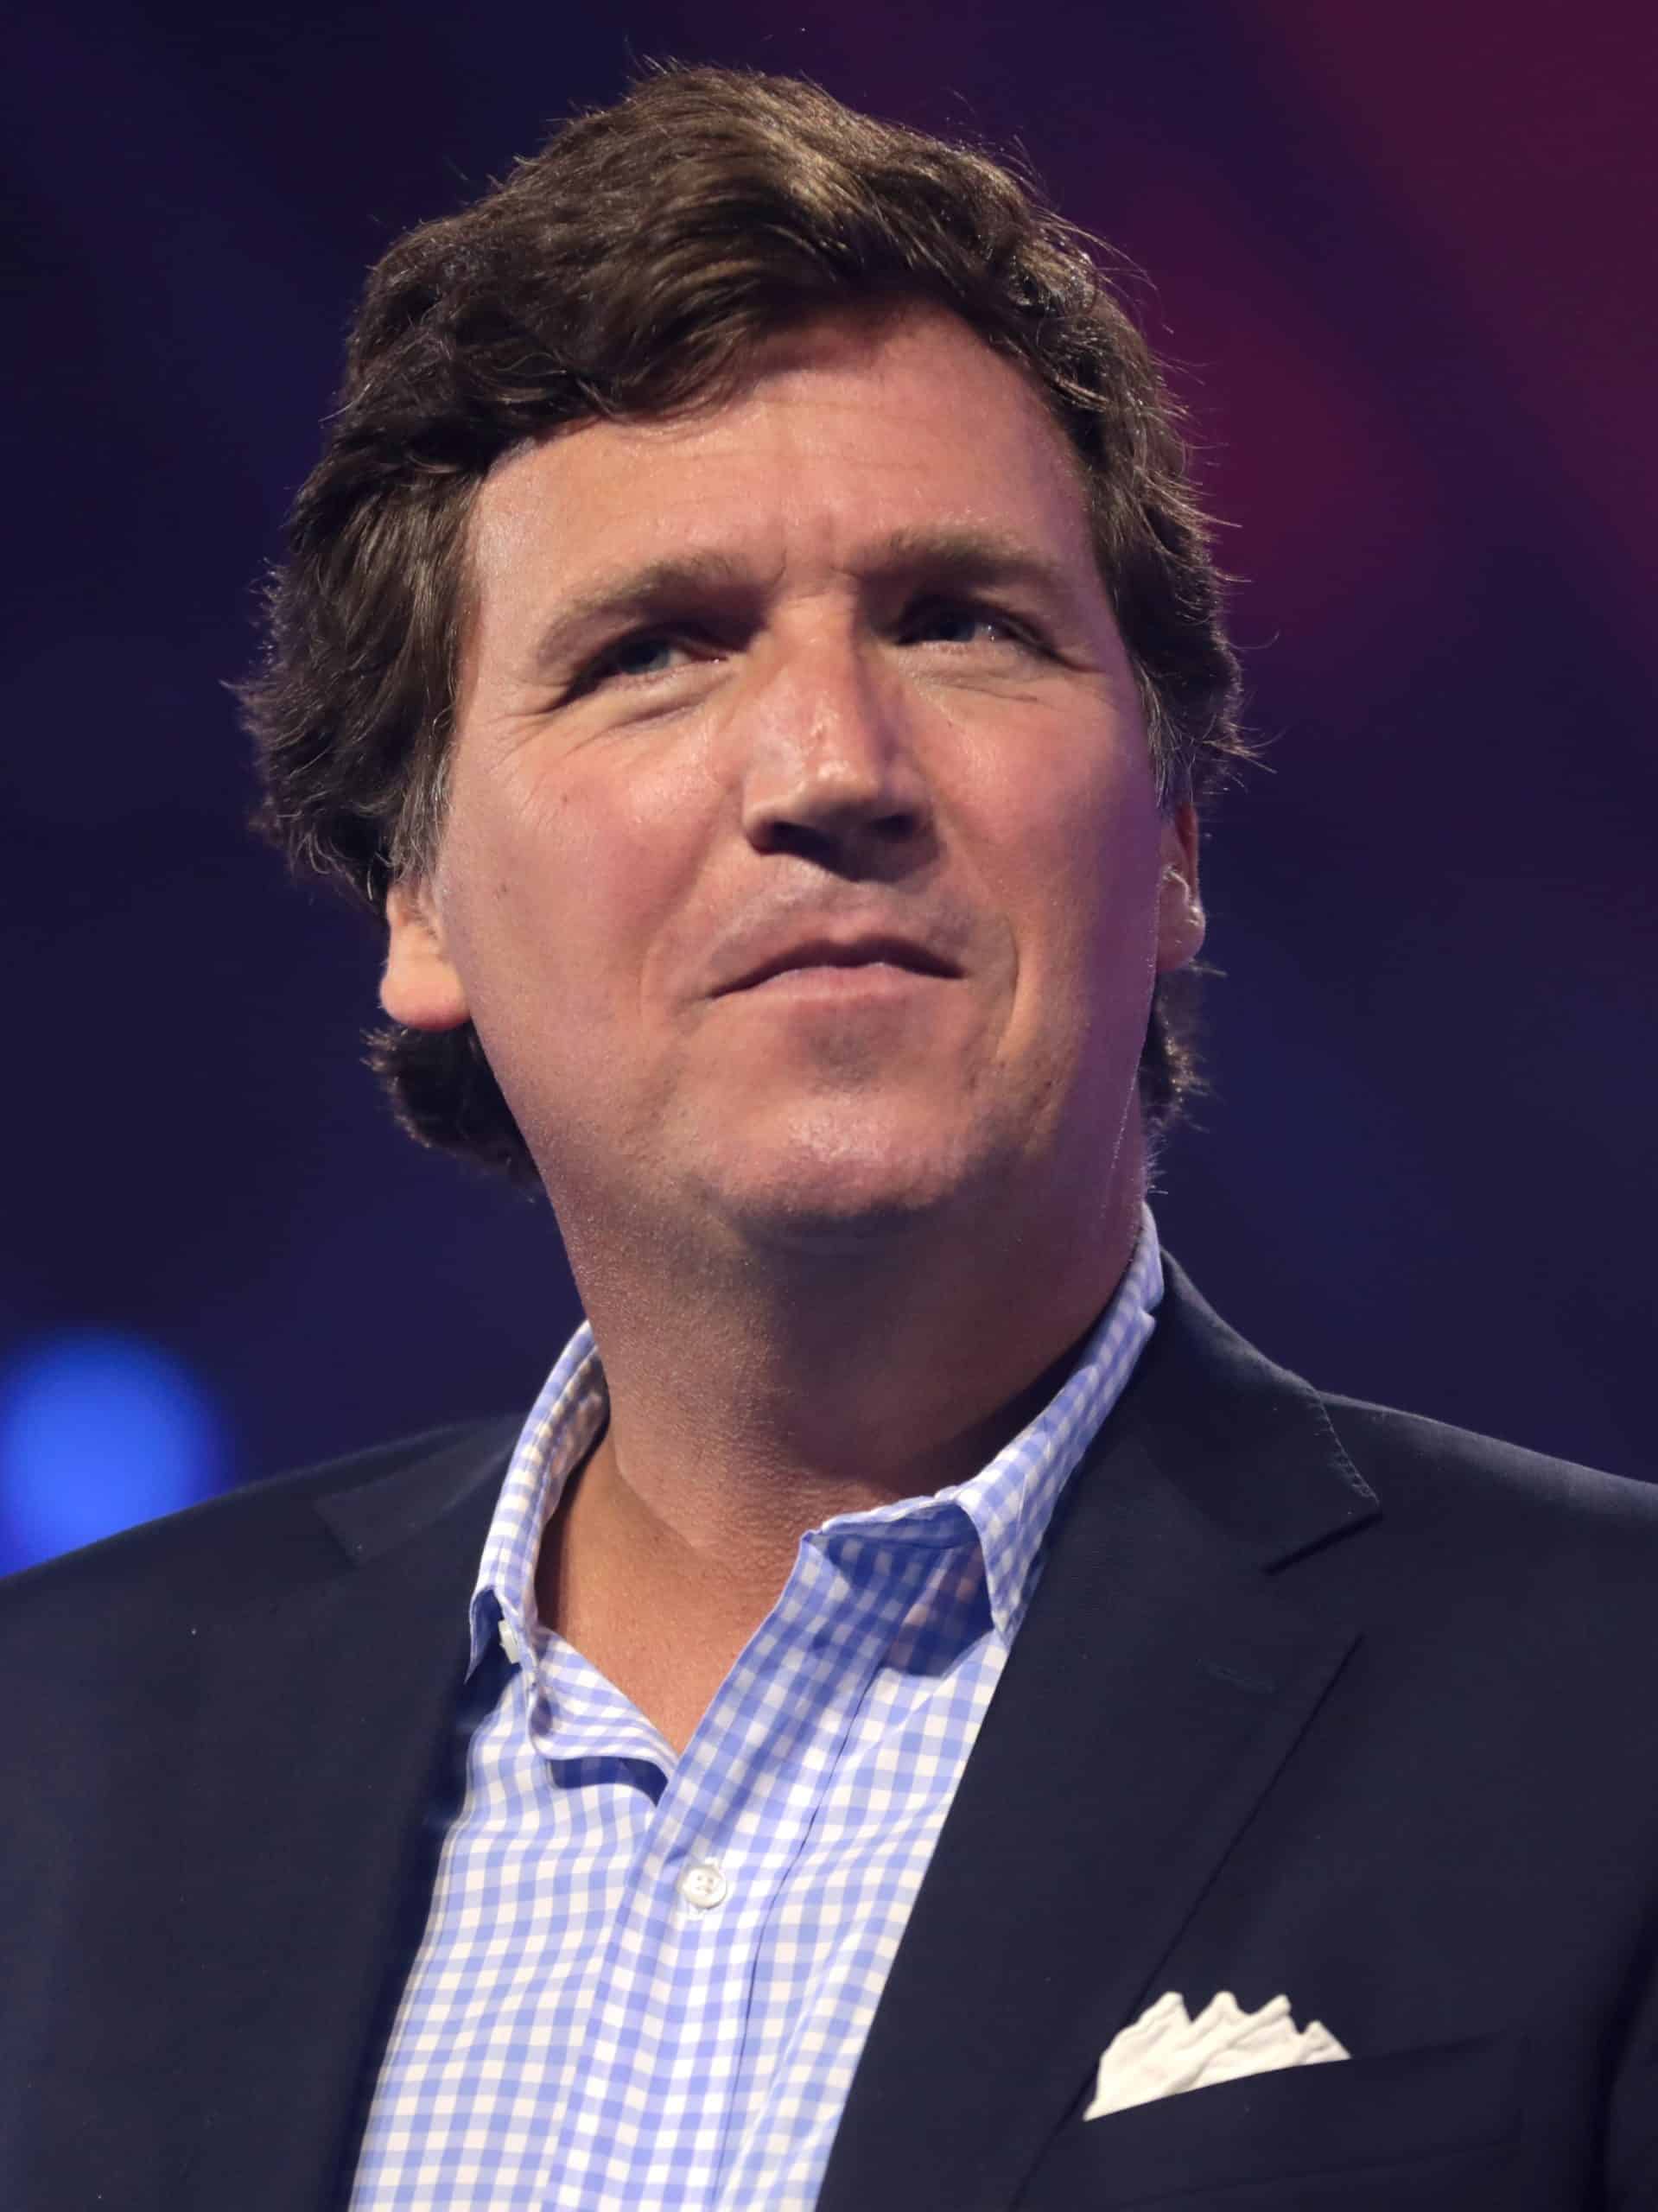 Who Is The Controversial Tucker Carlson And What Is His Influence To The Society